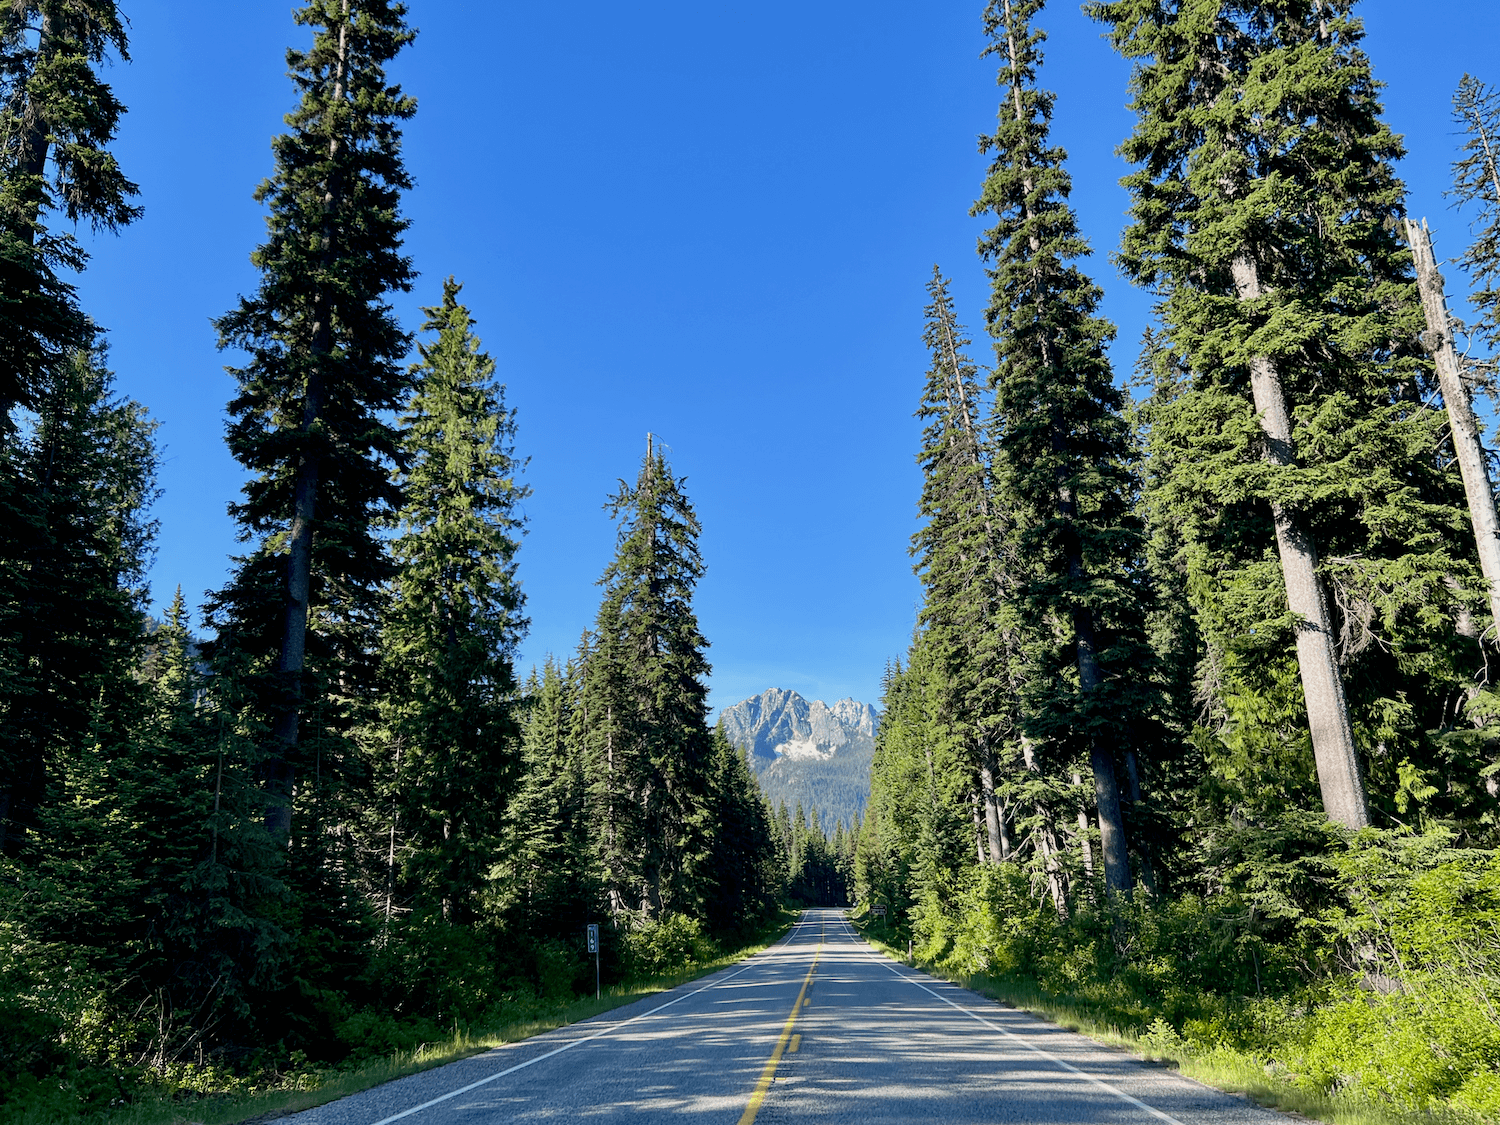 The roadway from Seattle to North Cascades National Park is stunning on this blue sky day, with mountains in the background and a two lane road framed in by tall and narrow fir trees.